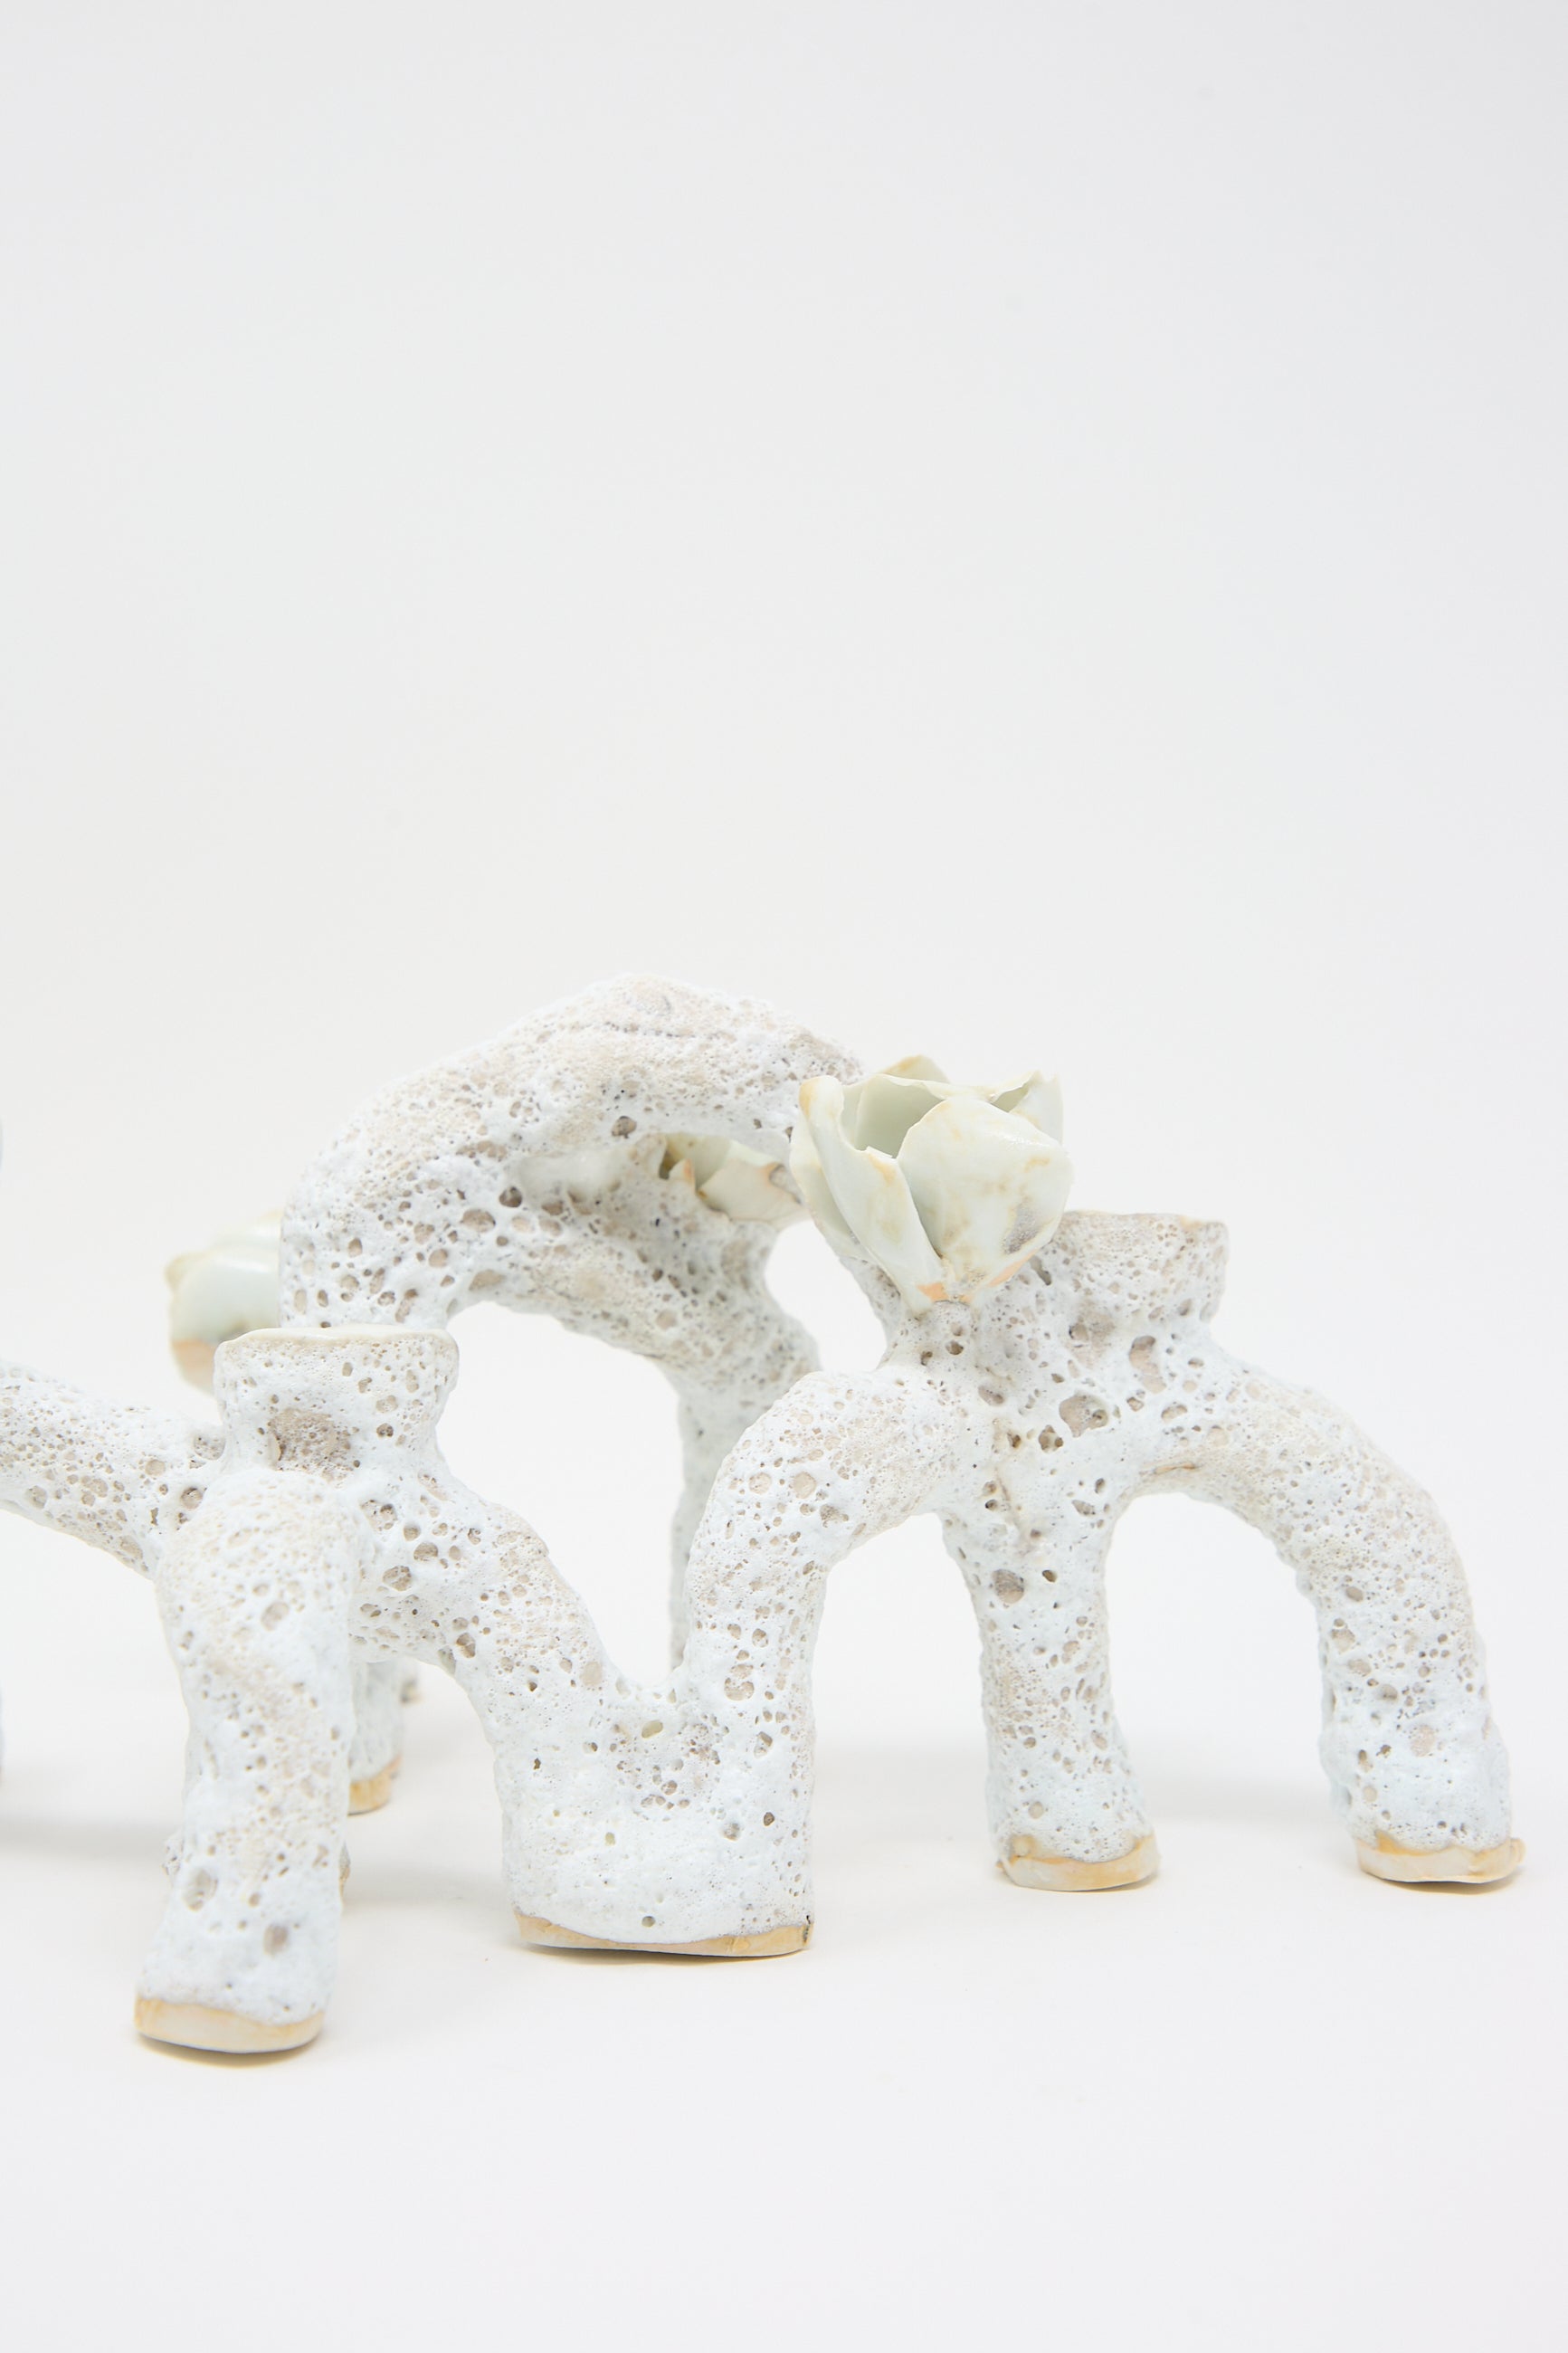 White, porous ceramic sculpture with an abstract, organic design featuring arch-like shapes and small, protruding elements. One of the arches has a flower-like detail on top, resembling luminescent petals. This hand-built piece stands against a plain white background. The **Blooming Arches Candle Holder** by **Dear You** beautifully accentuates any space with its intricate craftsmanship.